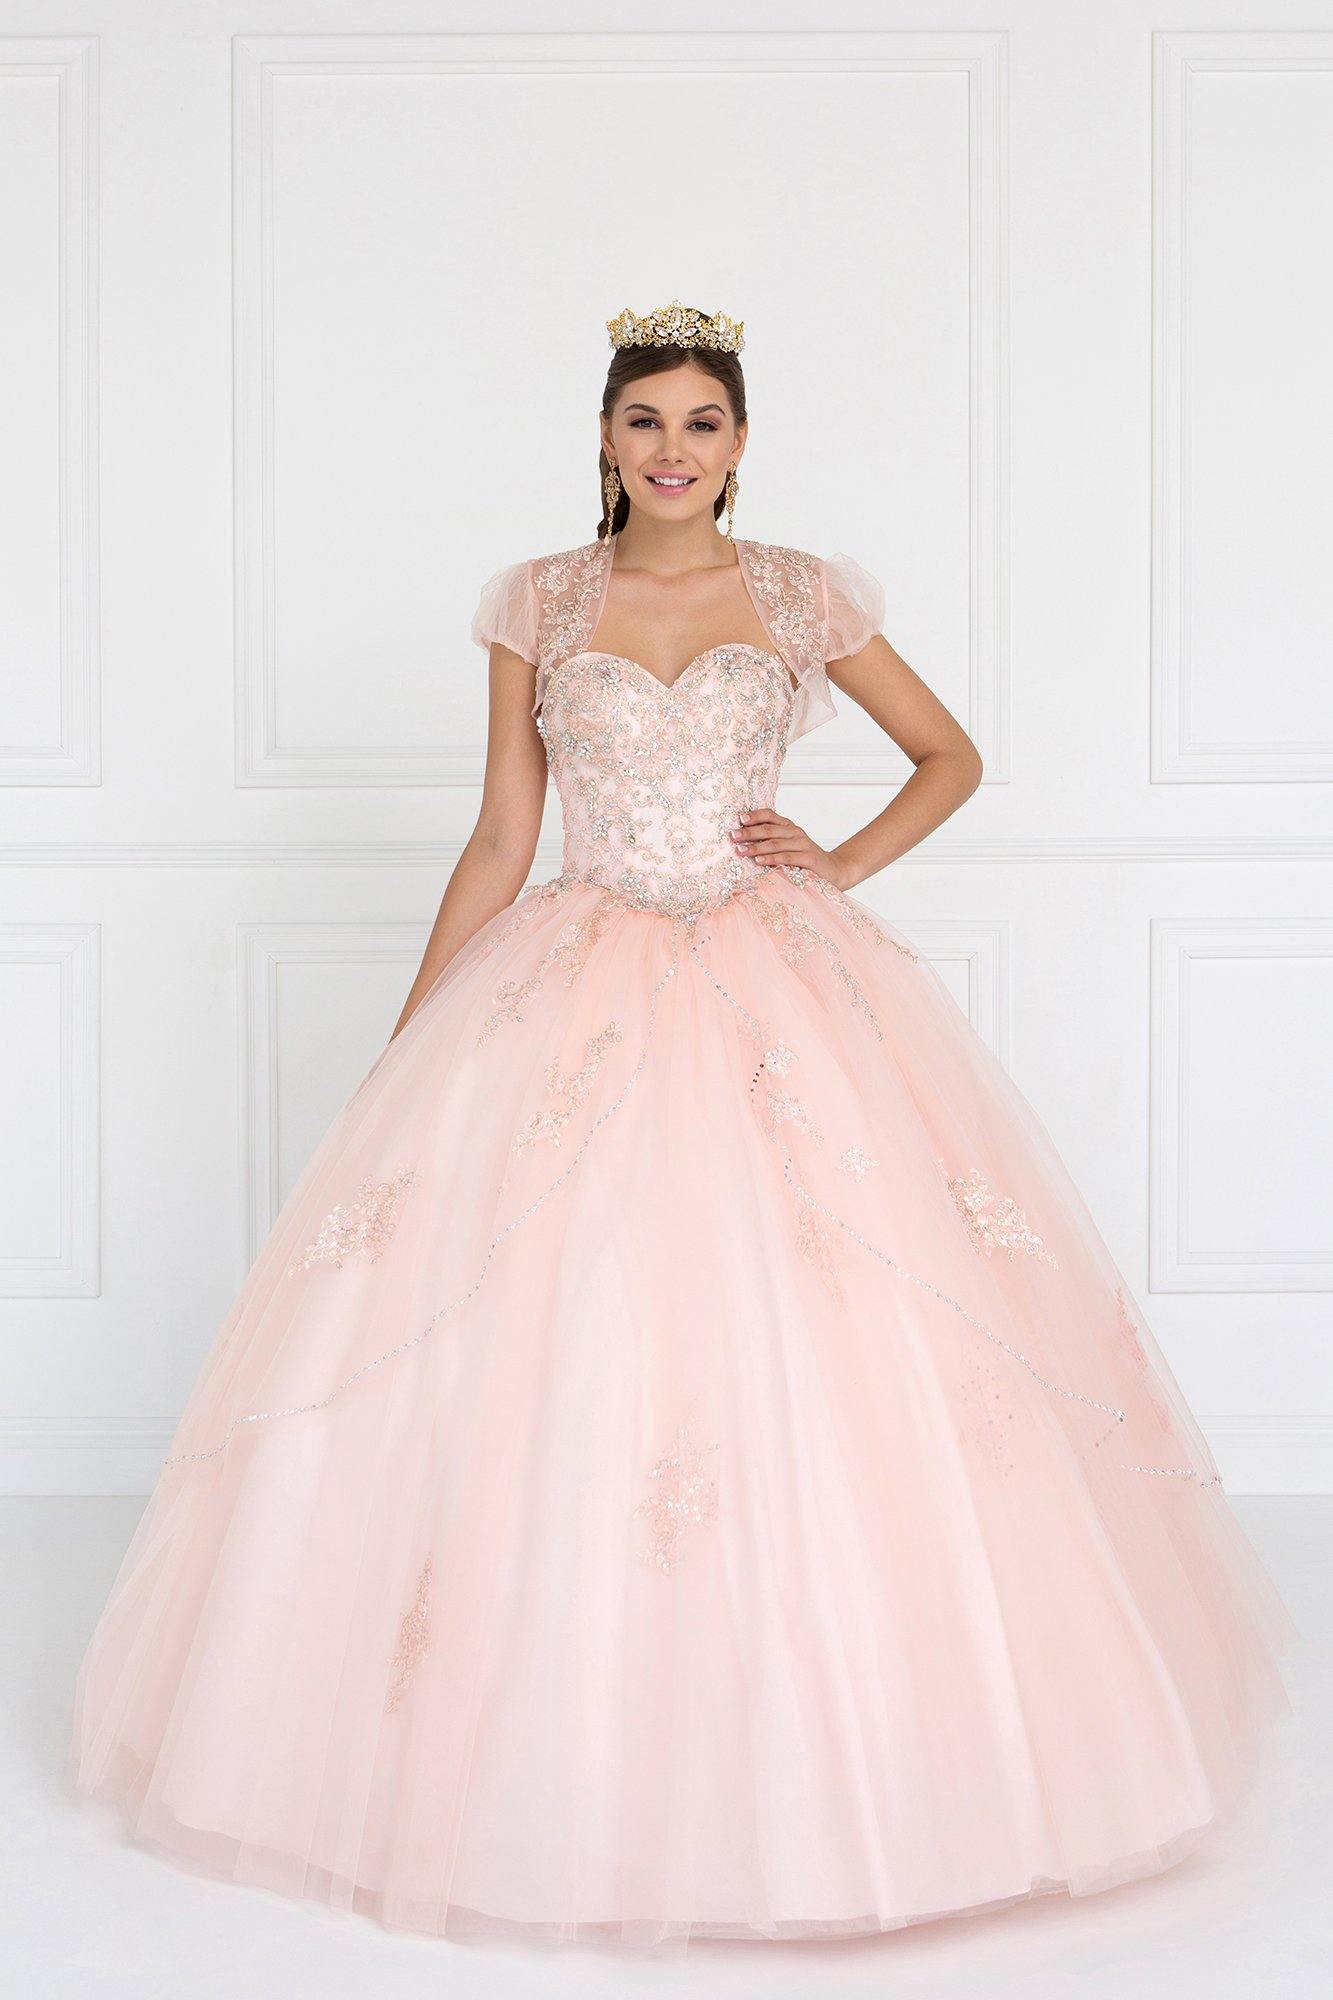 Quinceanera Embellished Tulle Quinceanera Dress with Bolero - The Dress Outlet Elizabeth K